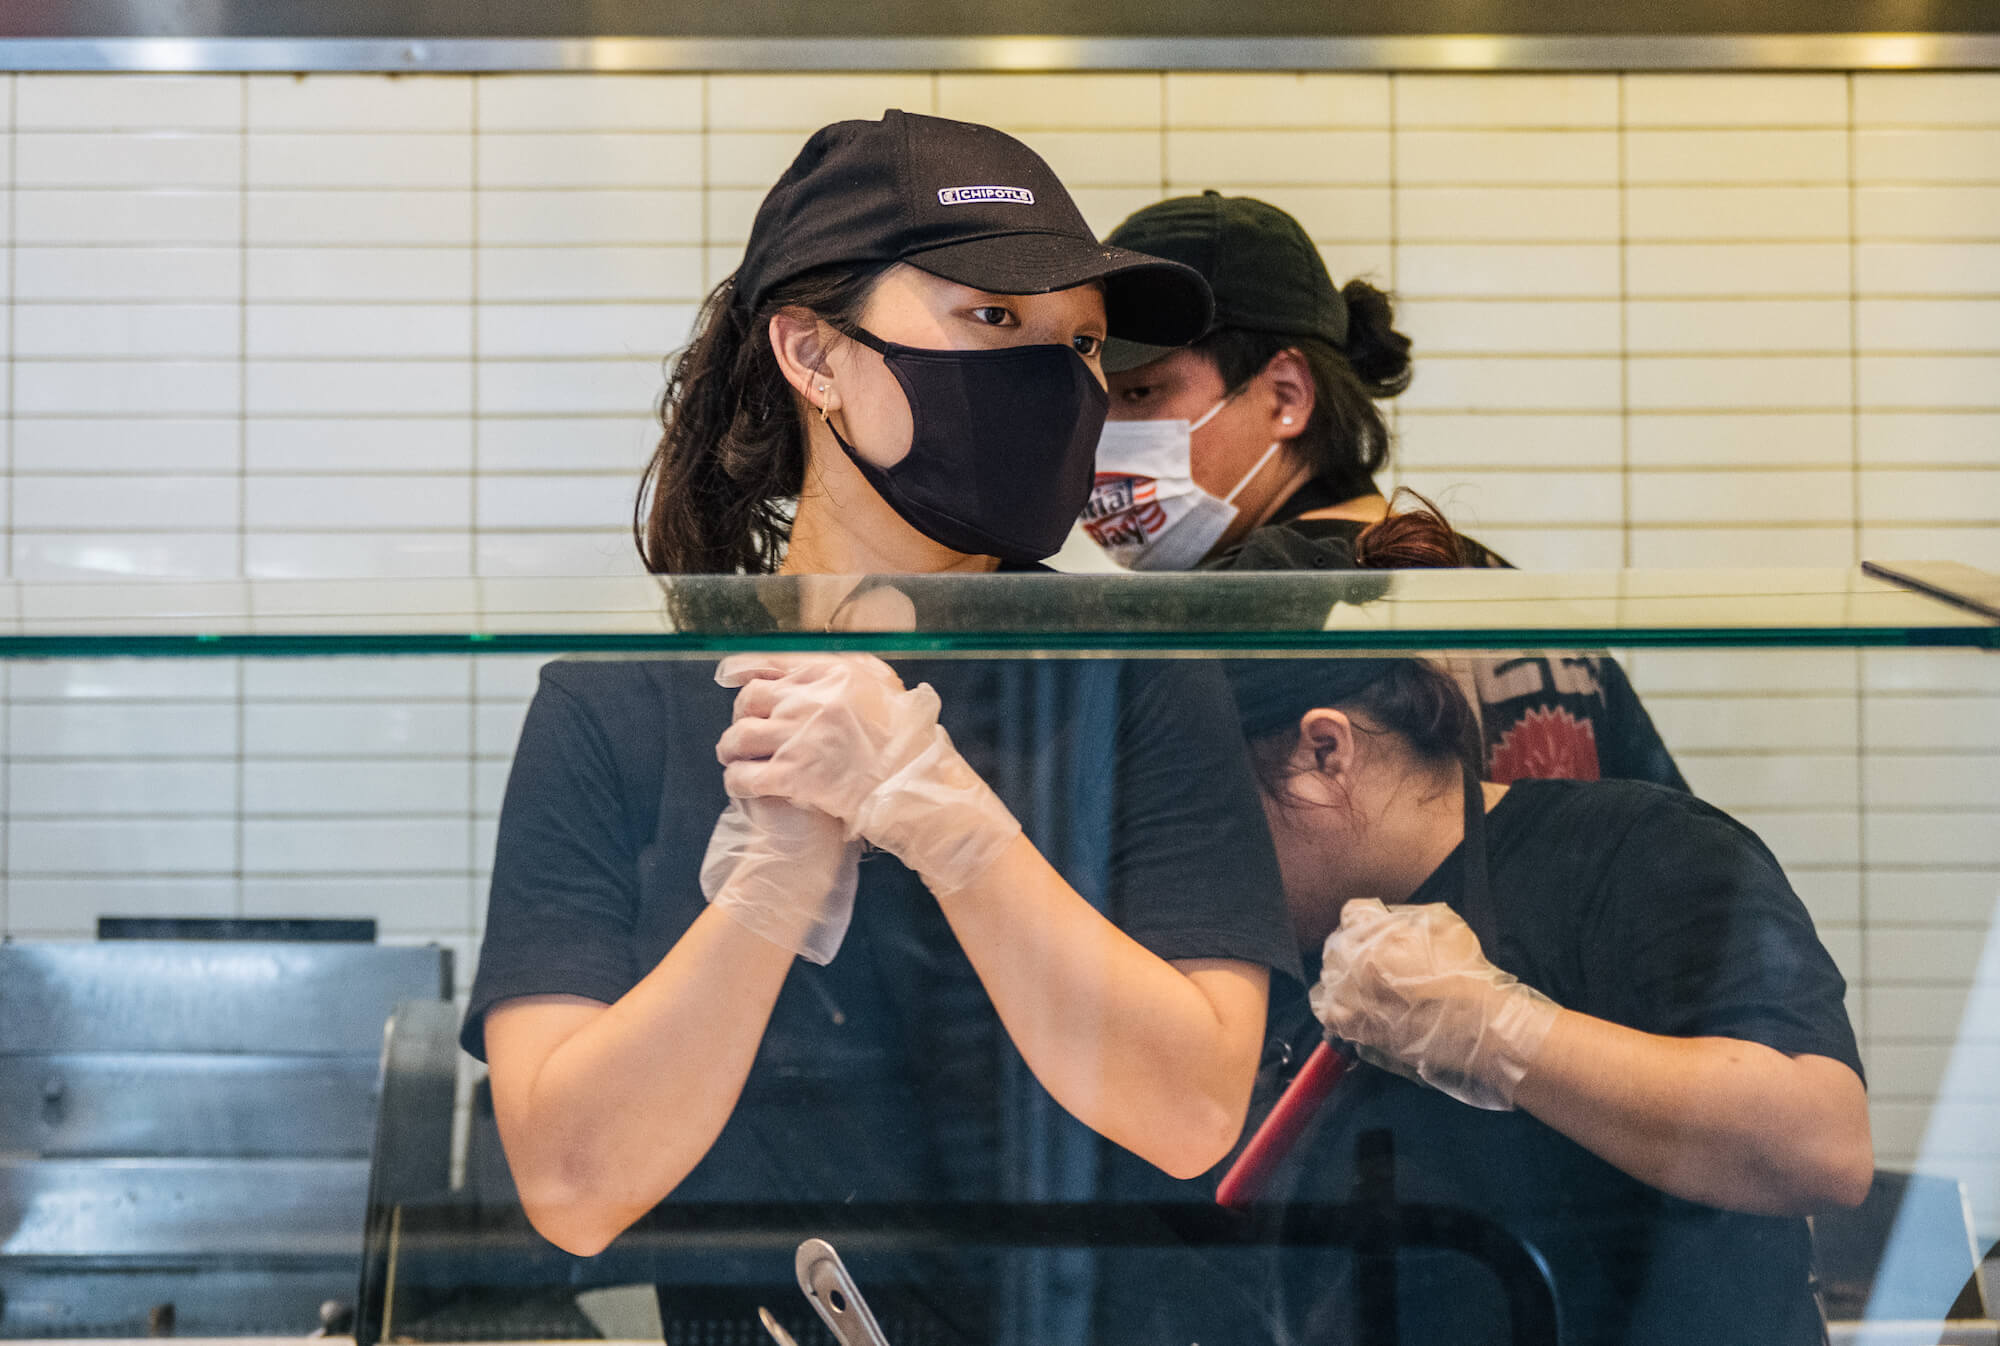 Masked Chipotle employees stand behind the counter. July 2021